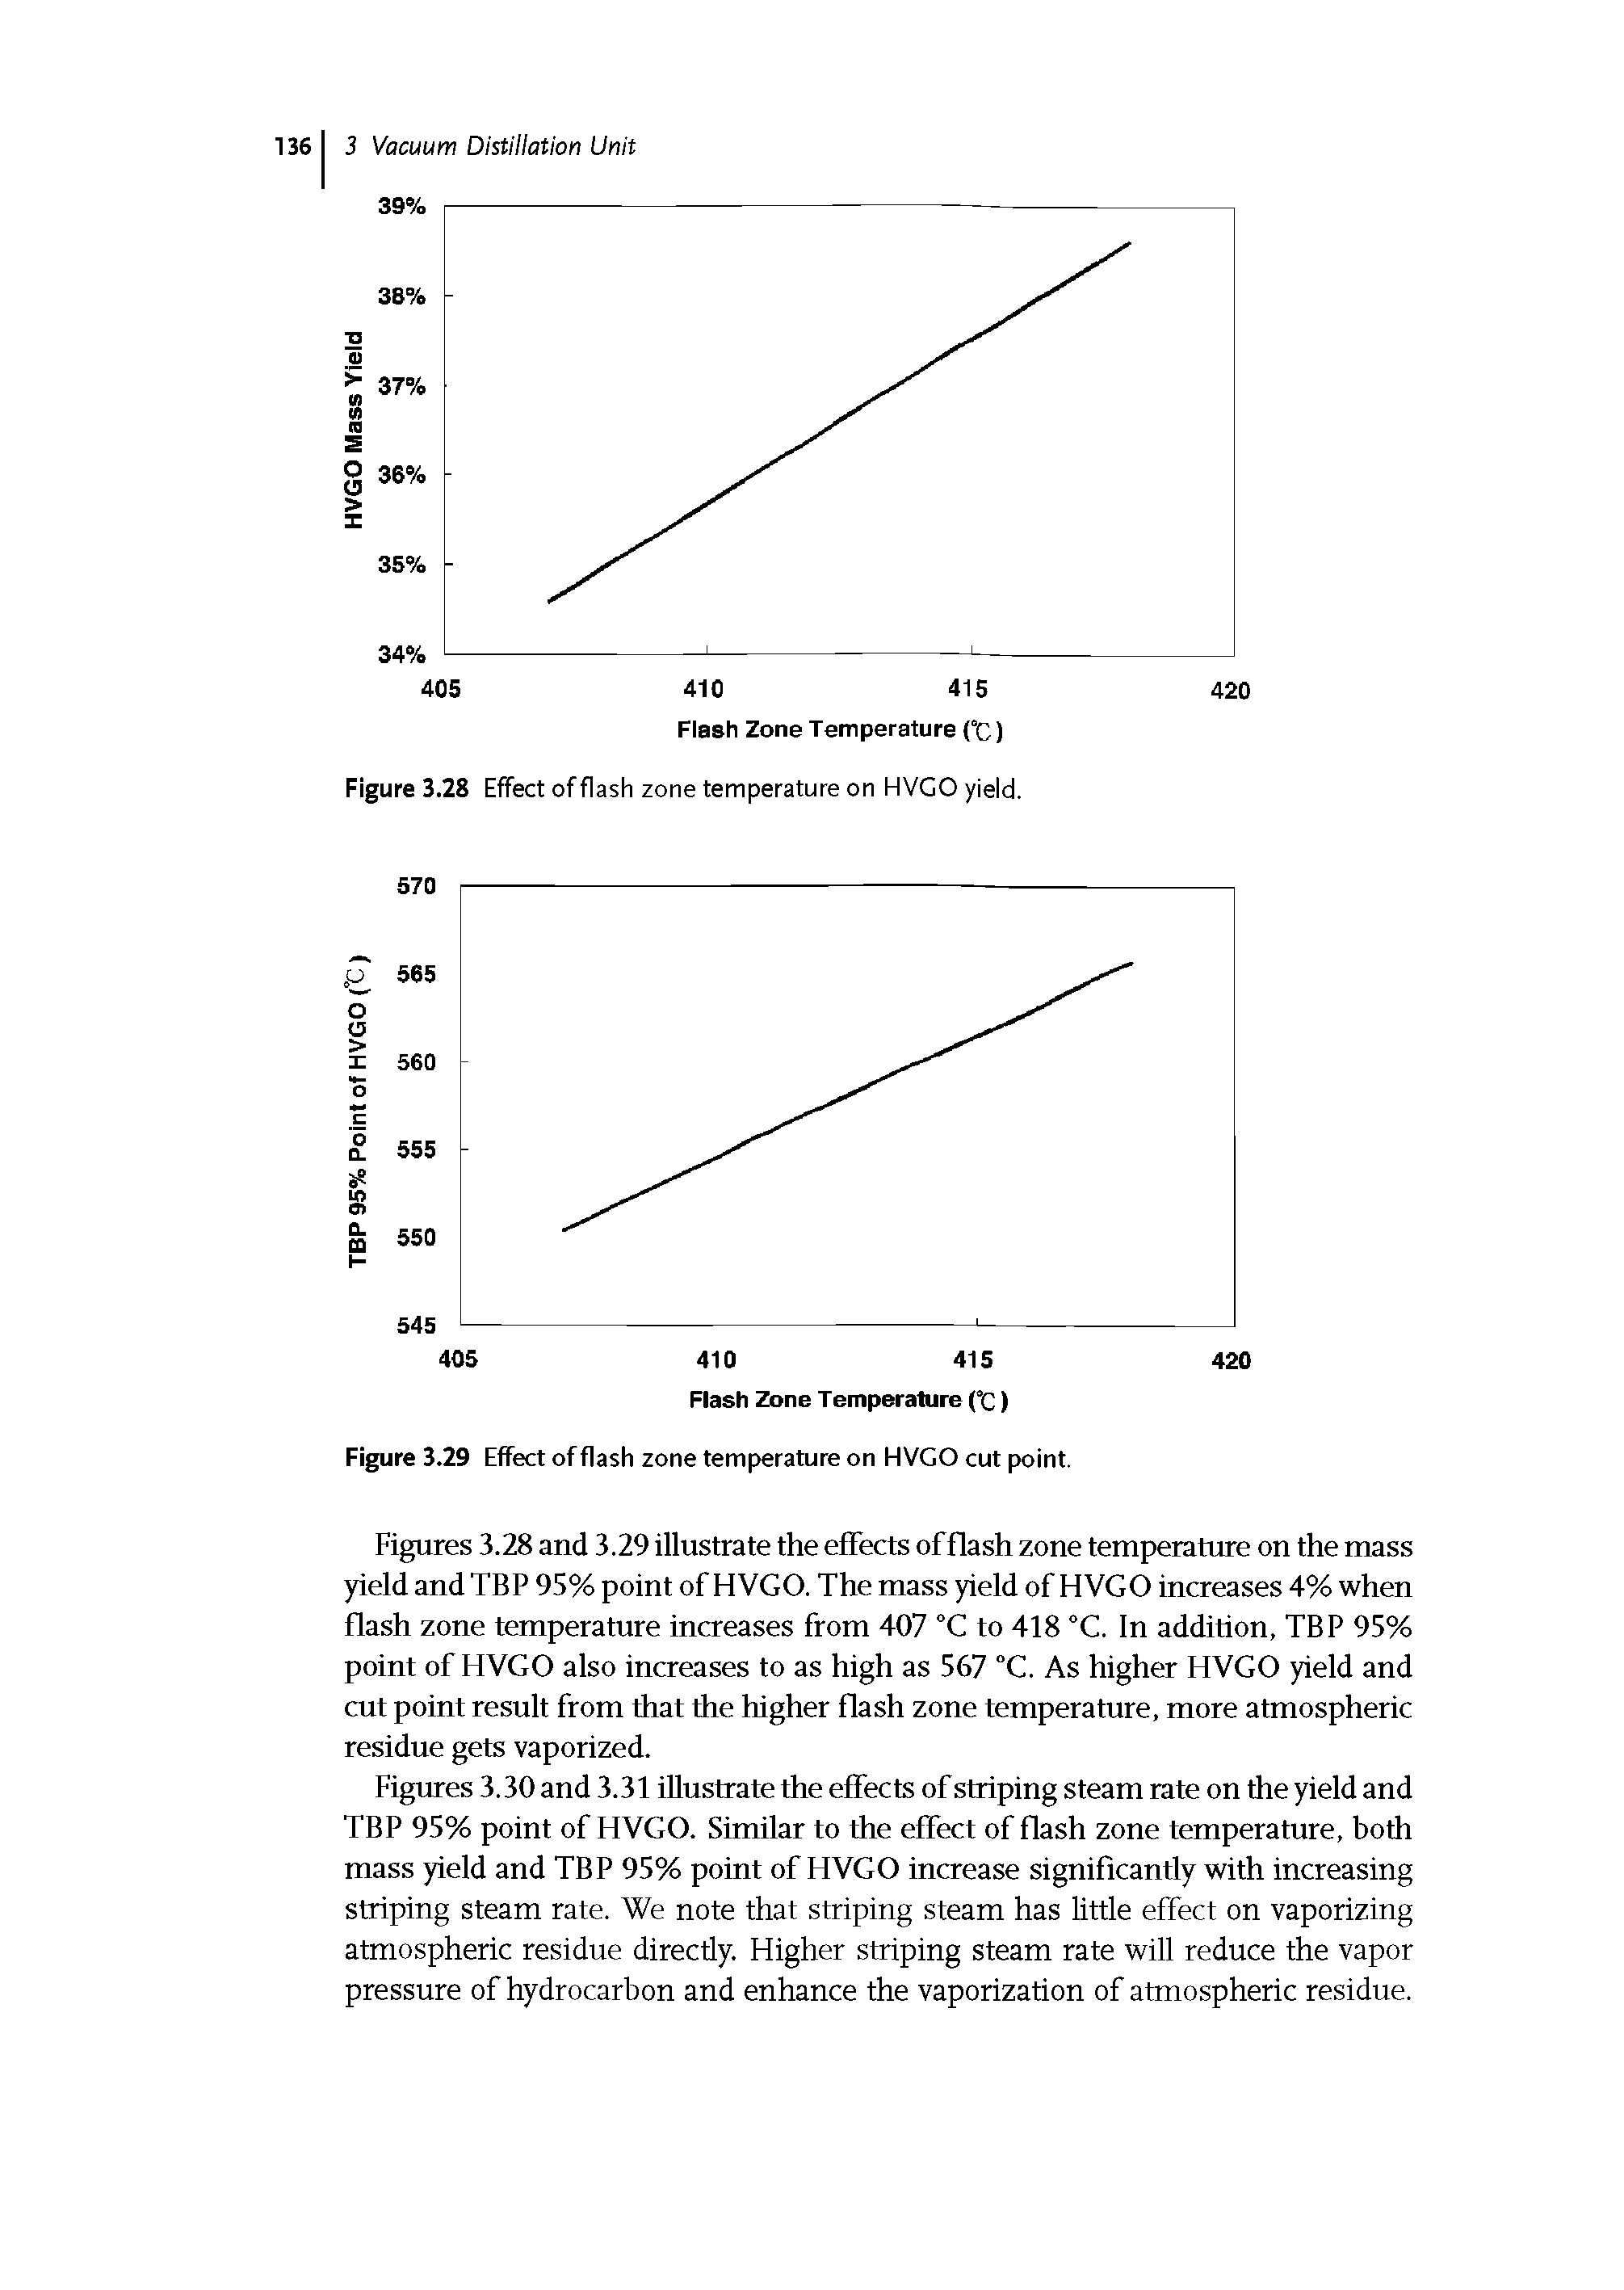 Figures 3.30 and 3.31 illustrate the effects of striping steam rate on the yield and TBP 95% point of HVGO. Similar to the effect of flash zone temperature, both mass yield and TBP 95% point of HVGO increase significantly with increasing striping steam rate. We note that striping steam has little effect on vaporizing atmospheric residue directly. Higher striping steam rate will reduce the vapor pressure of hydrocarbon and enhance the vaporization of atmospheric residue.